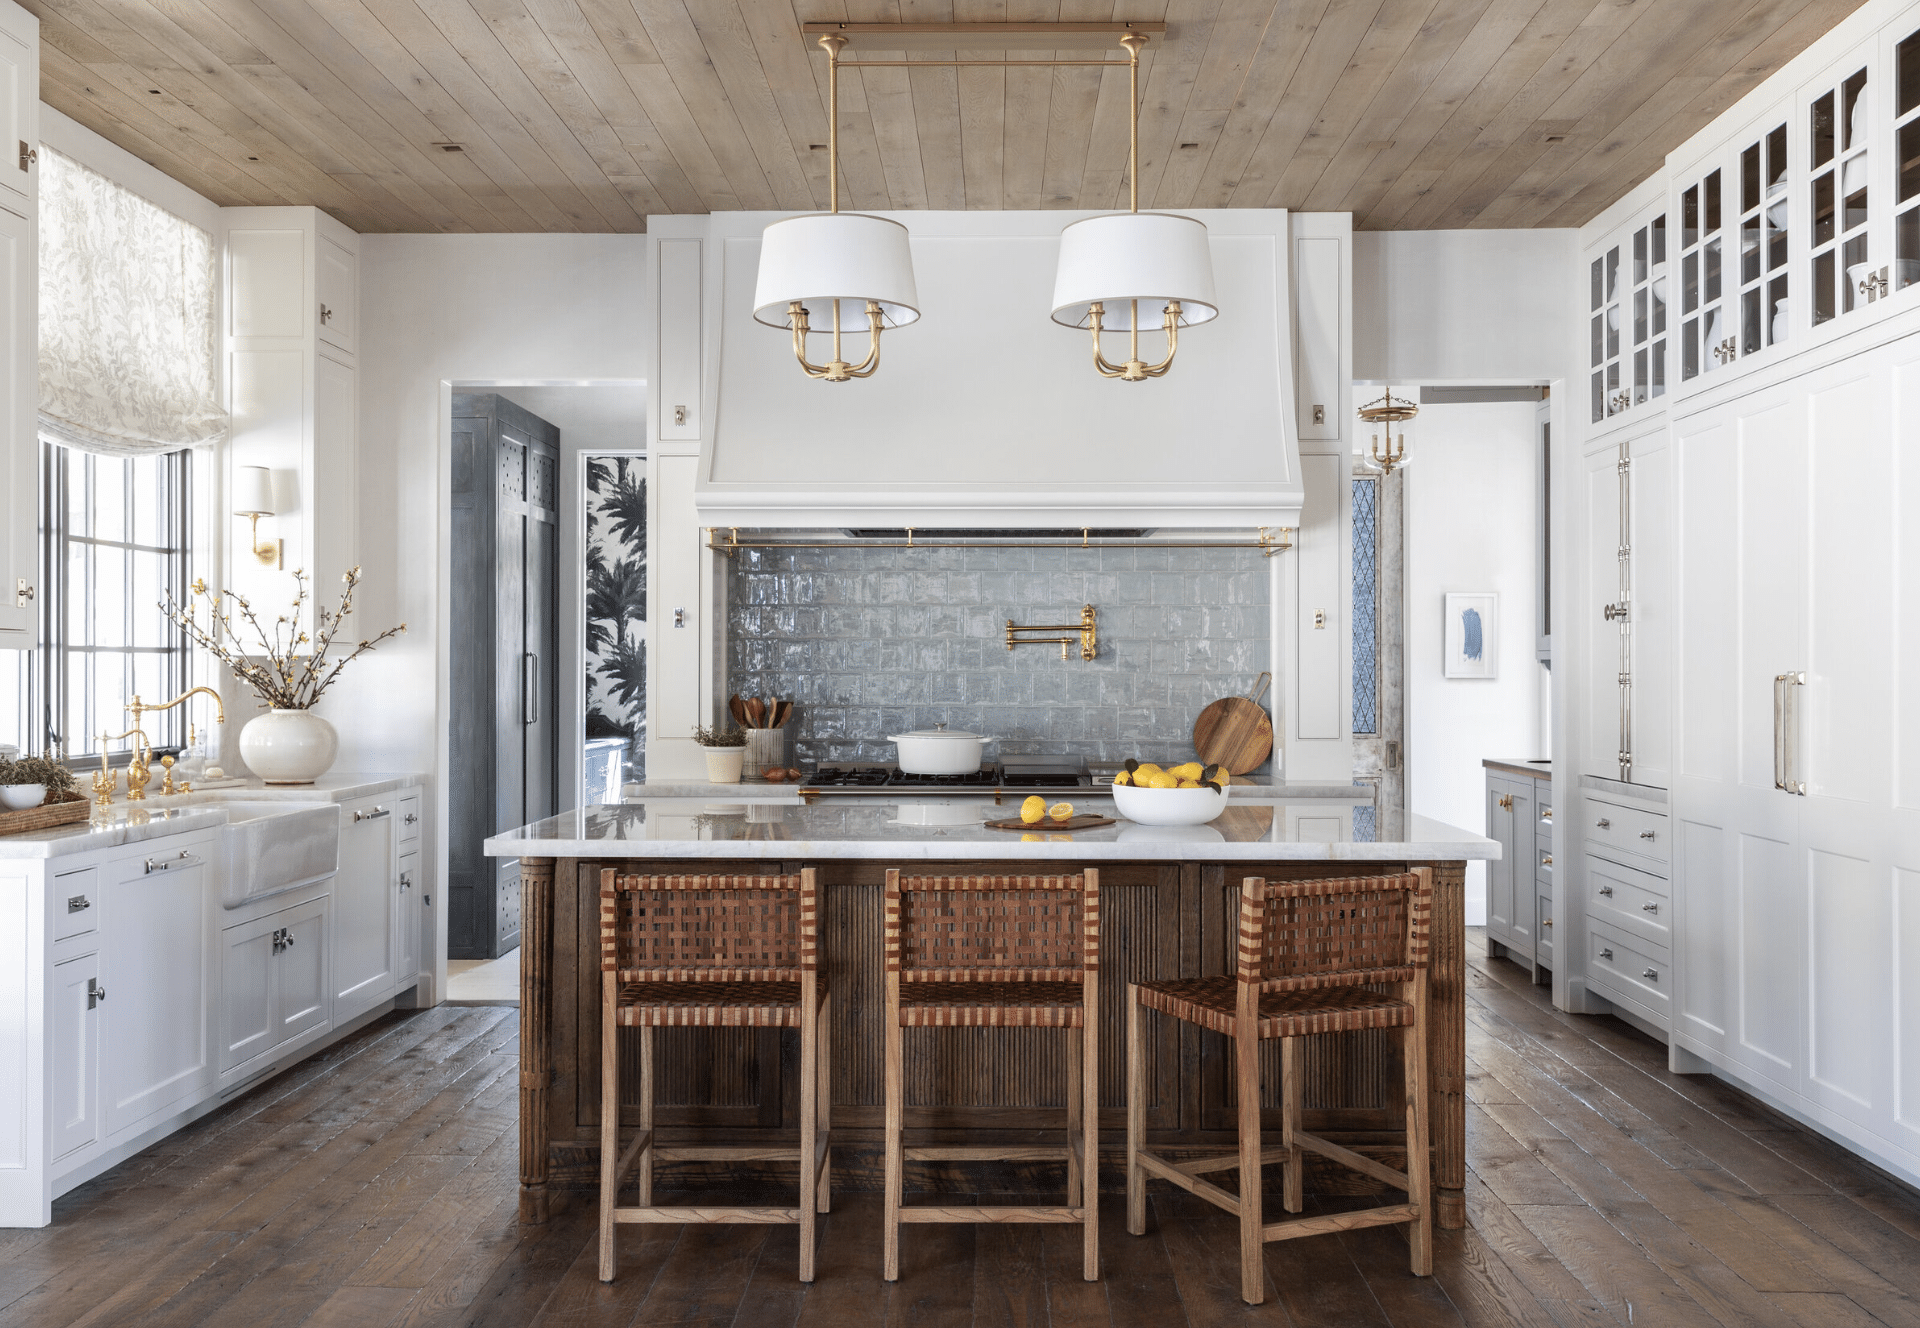 ARE WHITE KITCHENS STILL IN STYLE?